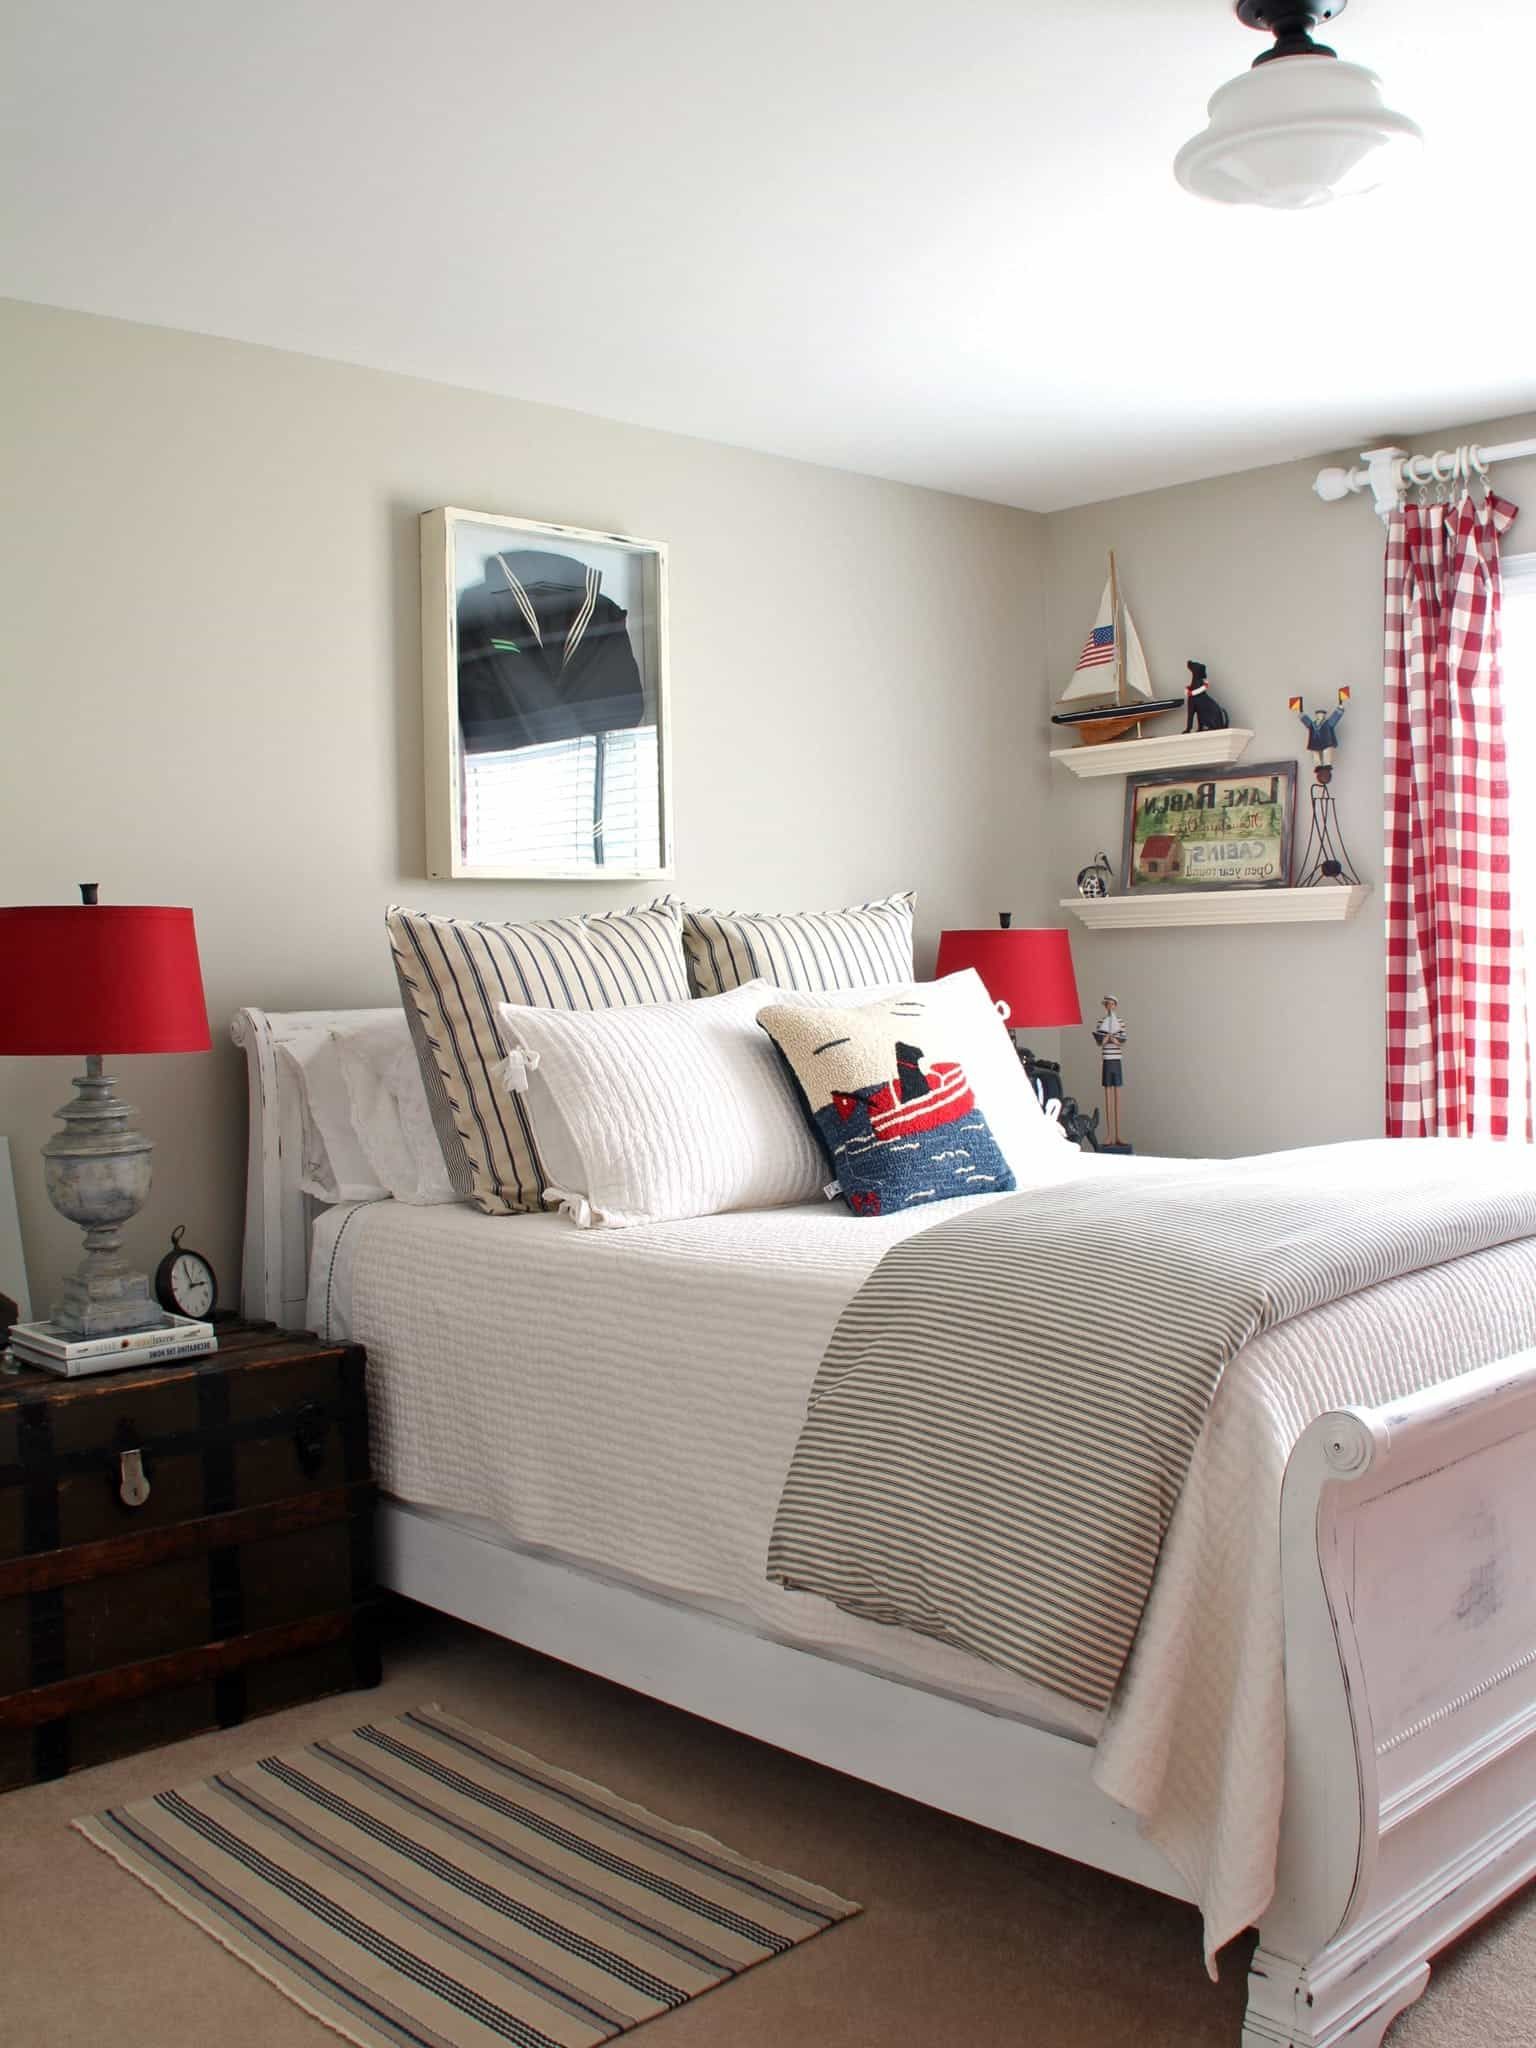 Kid’s Bedroom Features A Nautical Theme With Striped Fabrics And Sailboat Accessories (View 12 of 27)